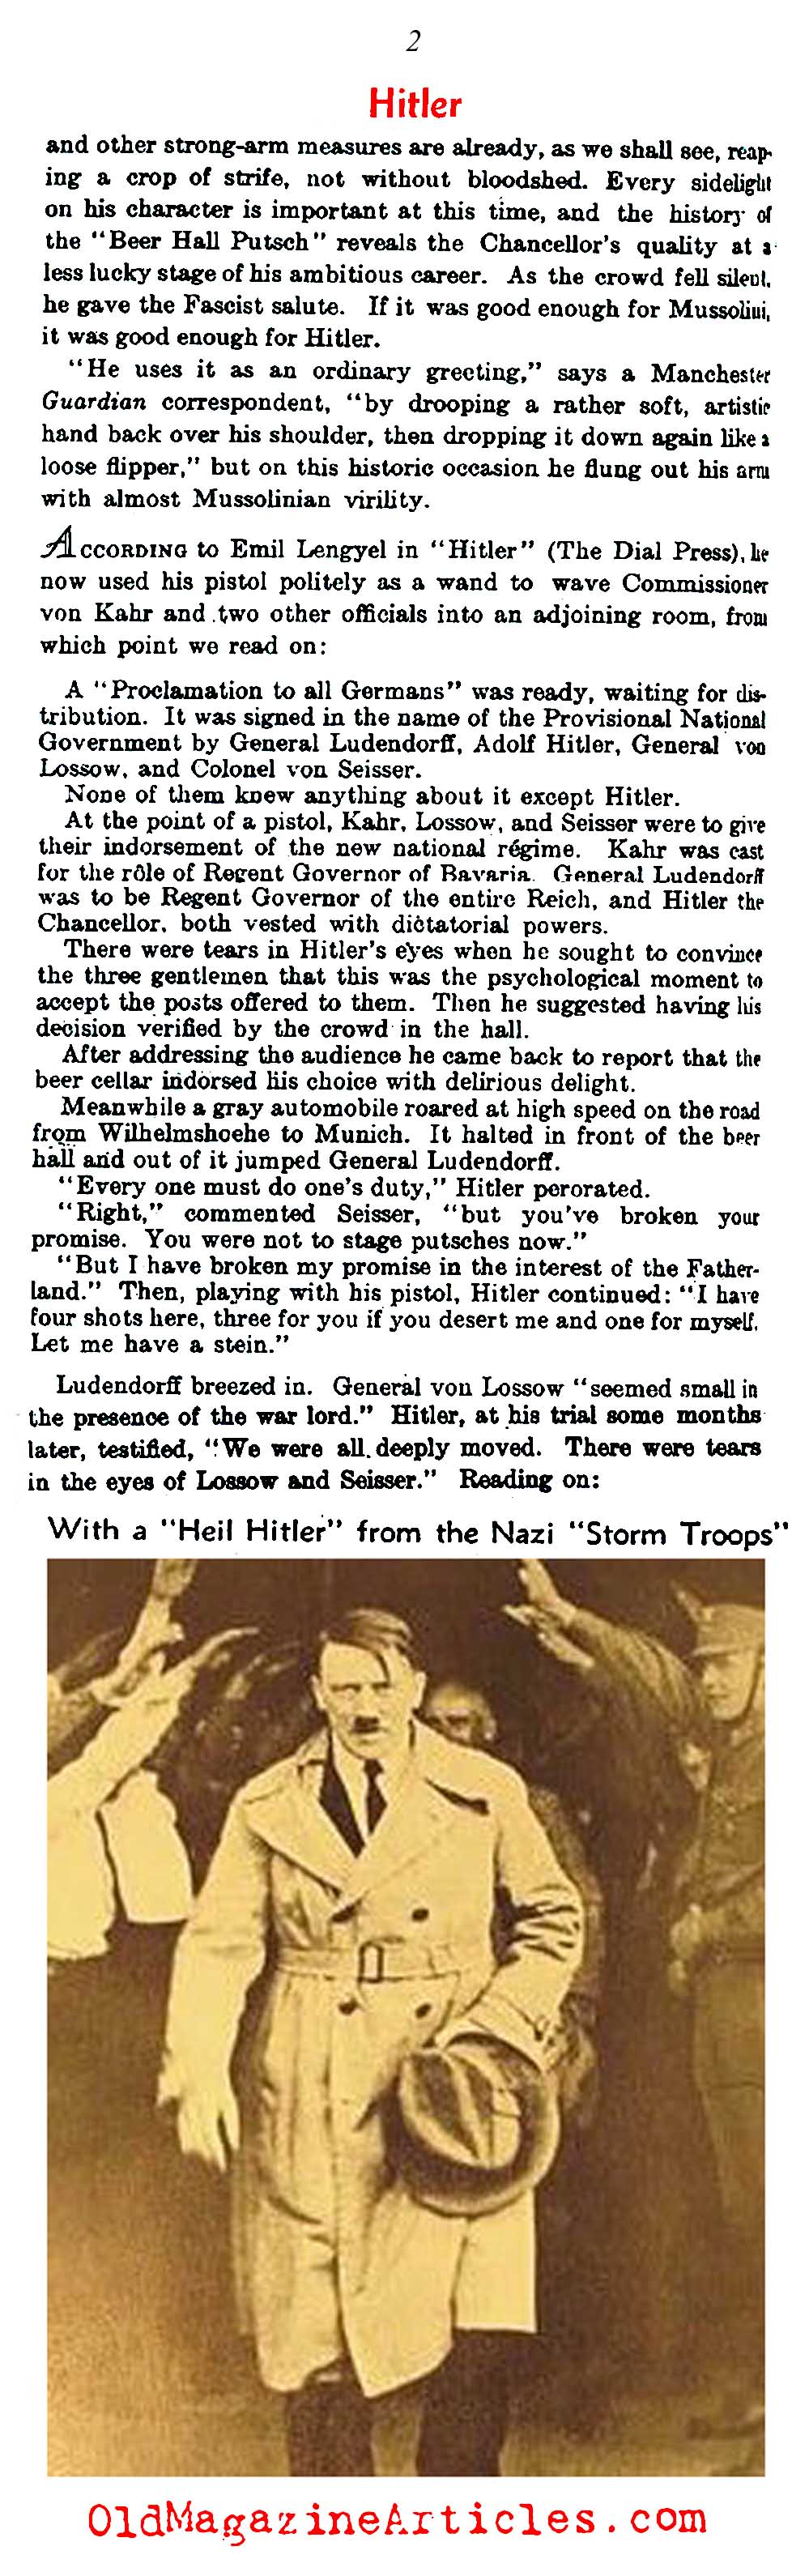 From the Beer Hall Putsch and Beyond (Literary Digest, 1933)